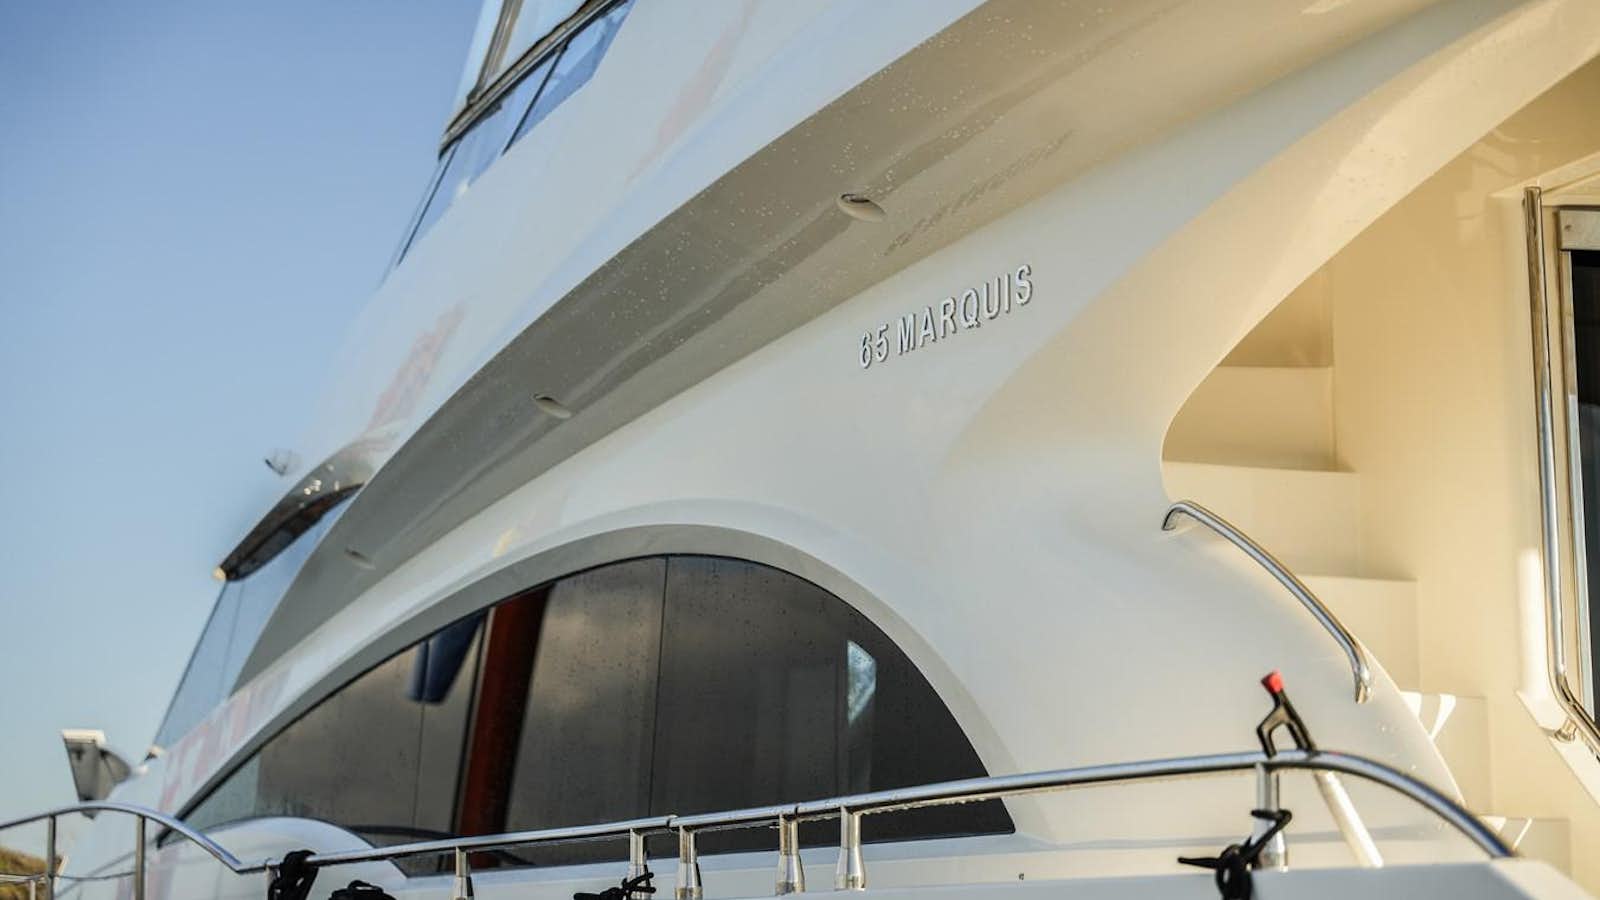 2006 marquis 65
Yacht for Sale